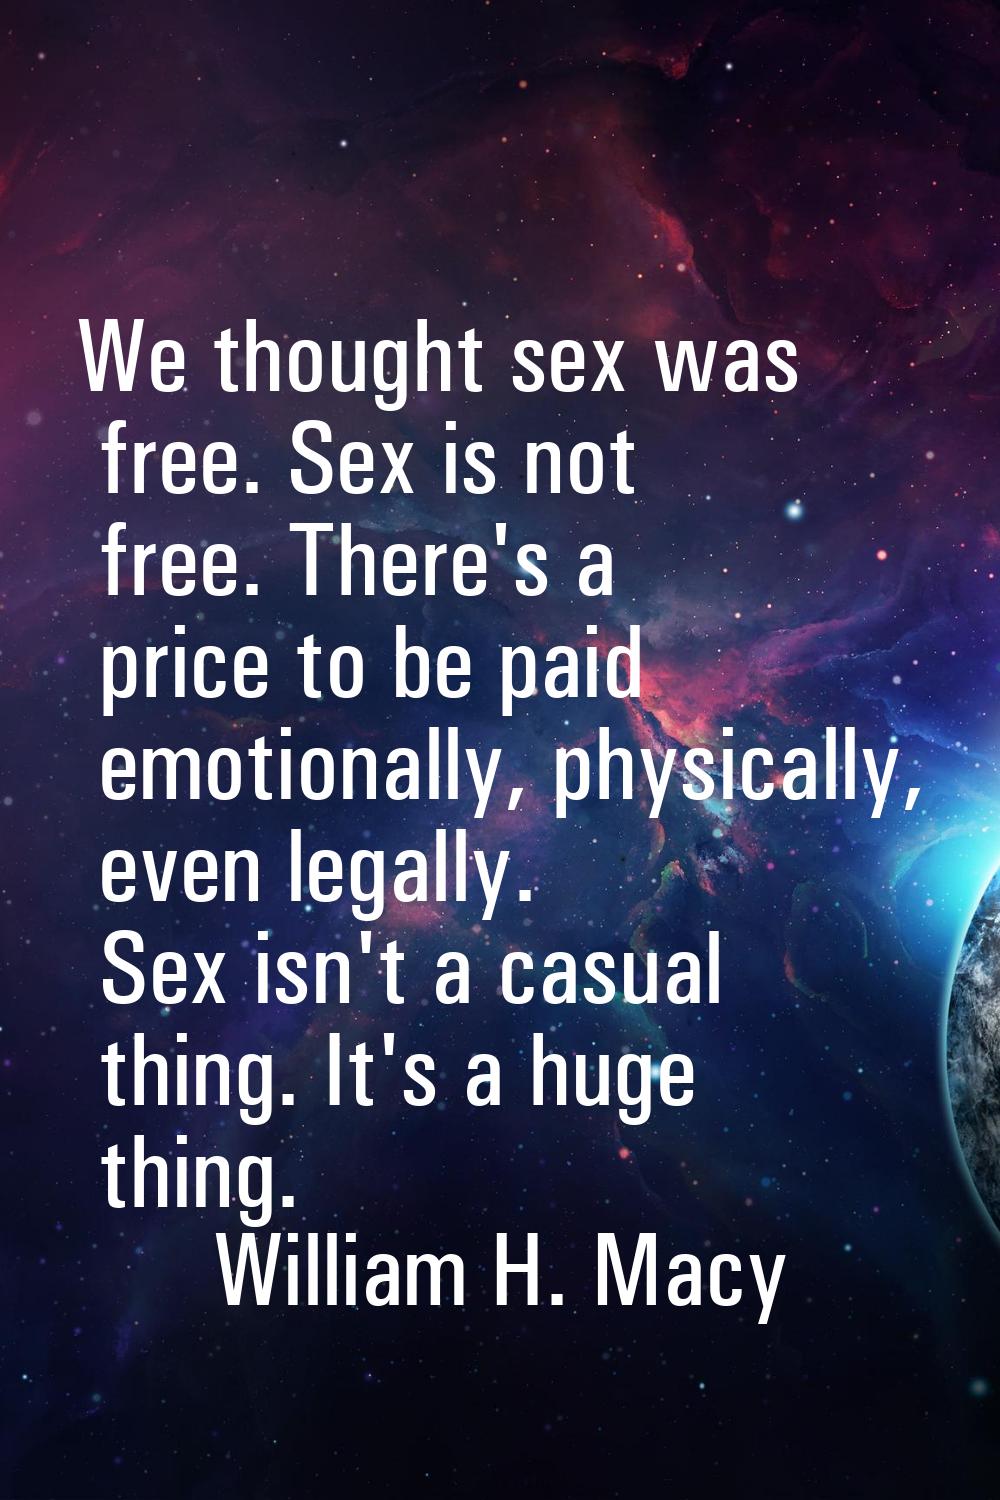 We thought sex was free. Sex is not free. There's a price to be paid emotionally, physically, even 